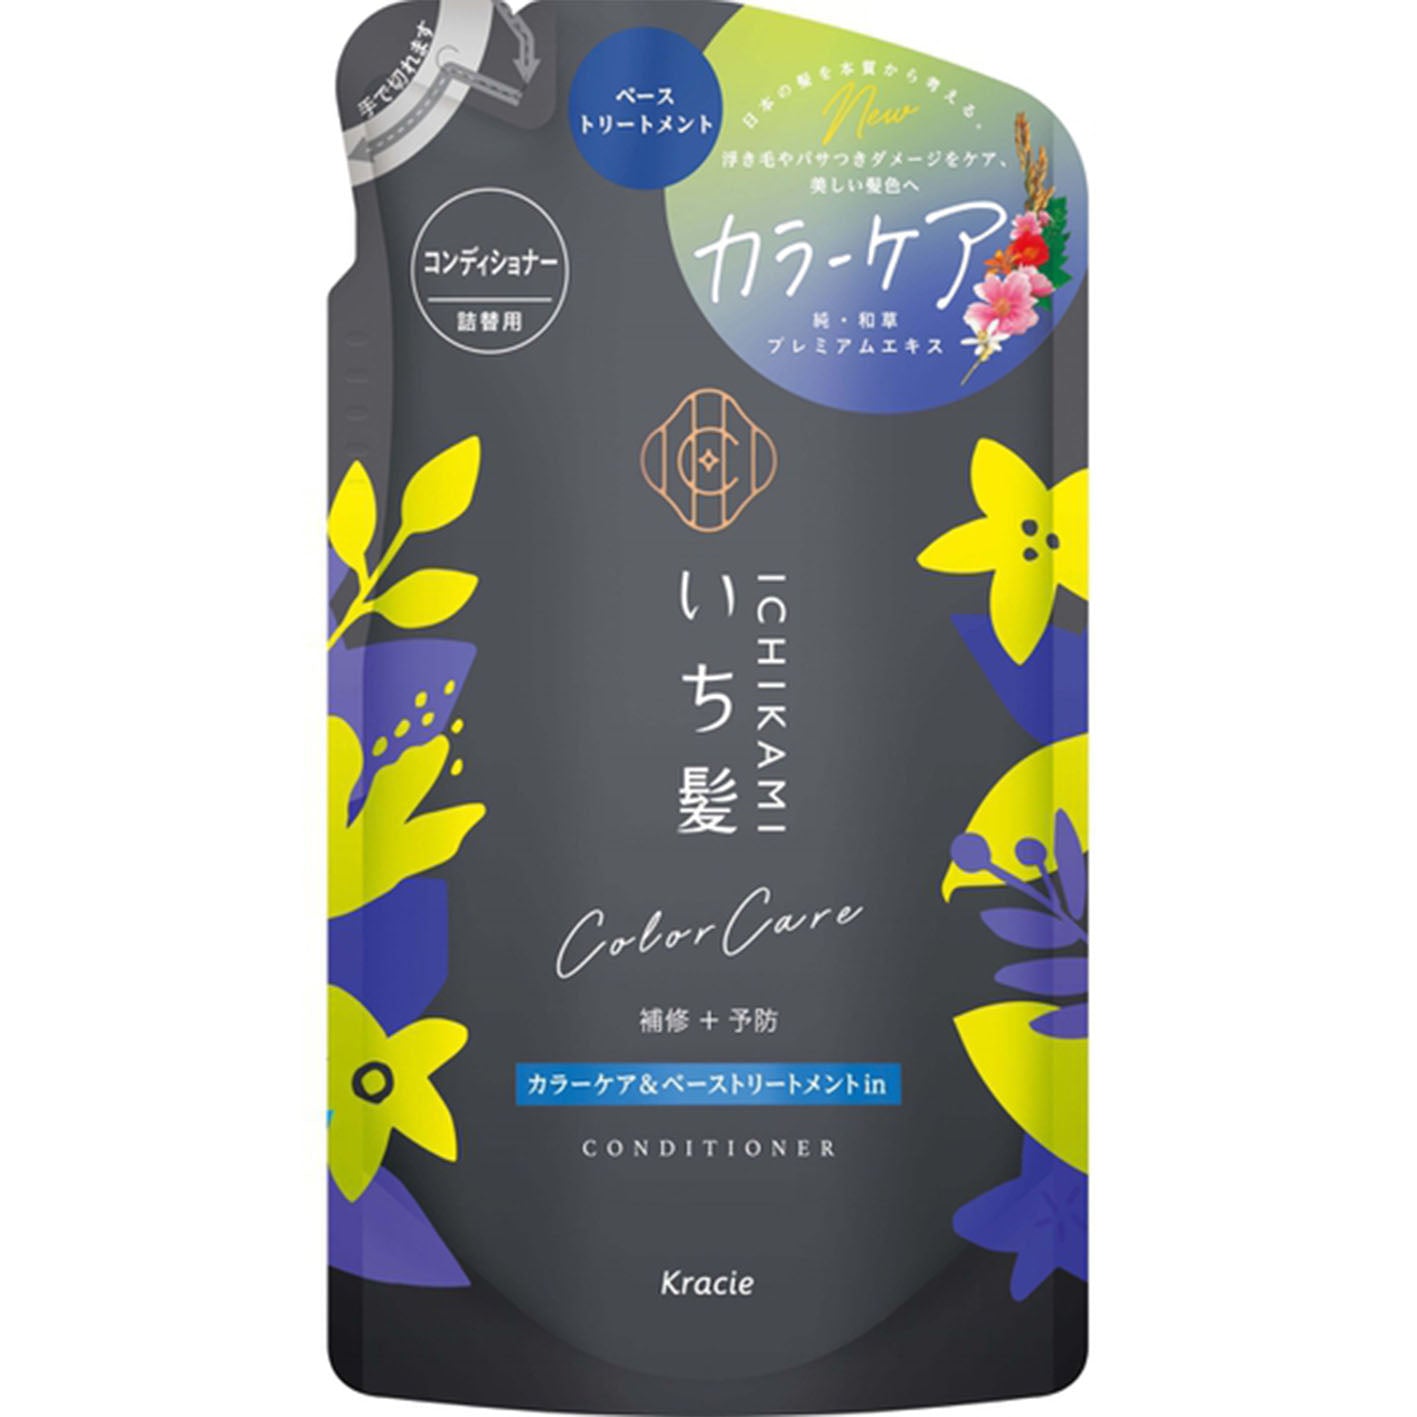 Ichikami Color Care Hair Conditioner 330ml - Refill - Harajuku Culture Japan - Japanease Products Store Beauty and Stationery